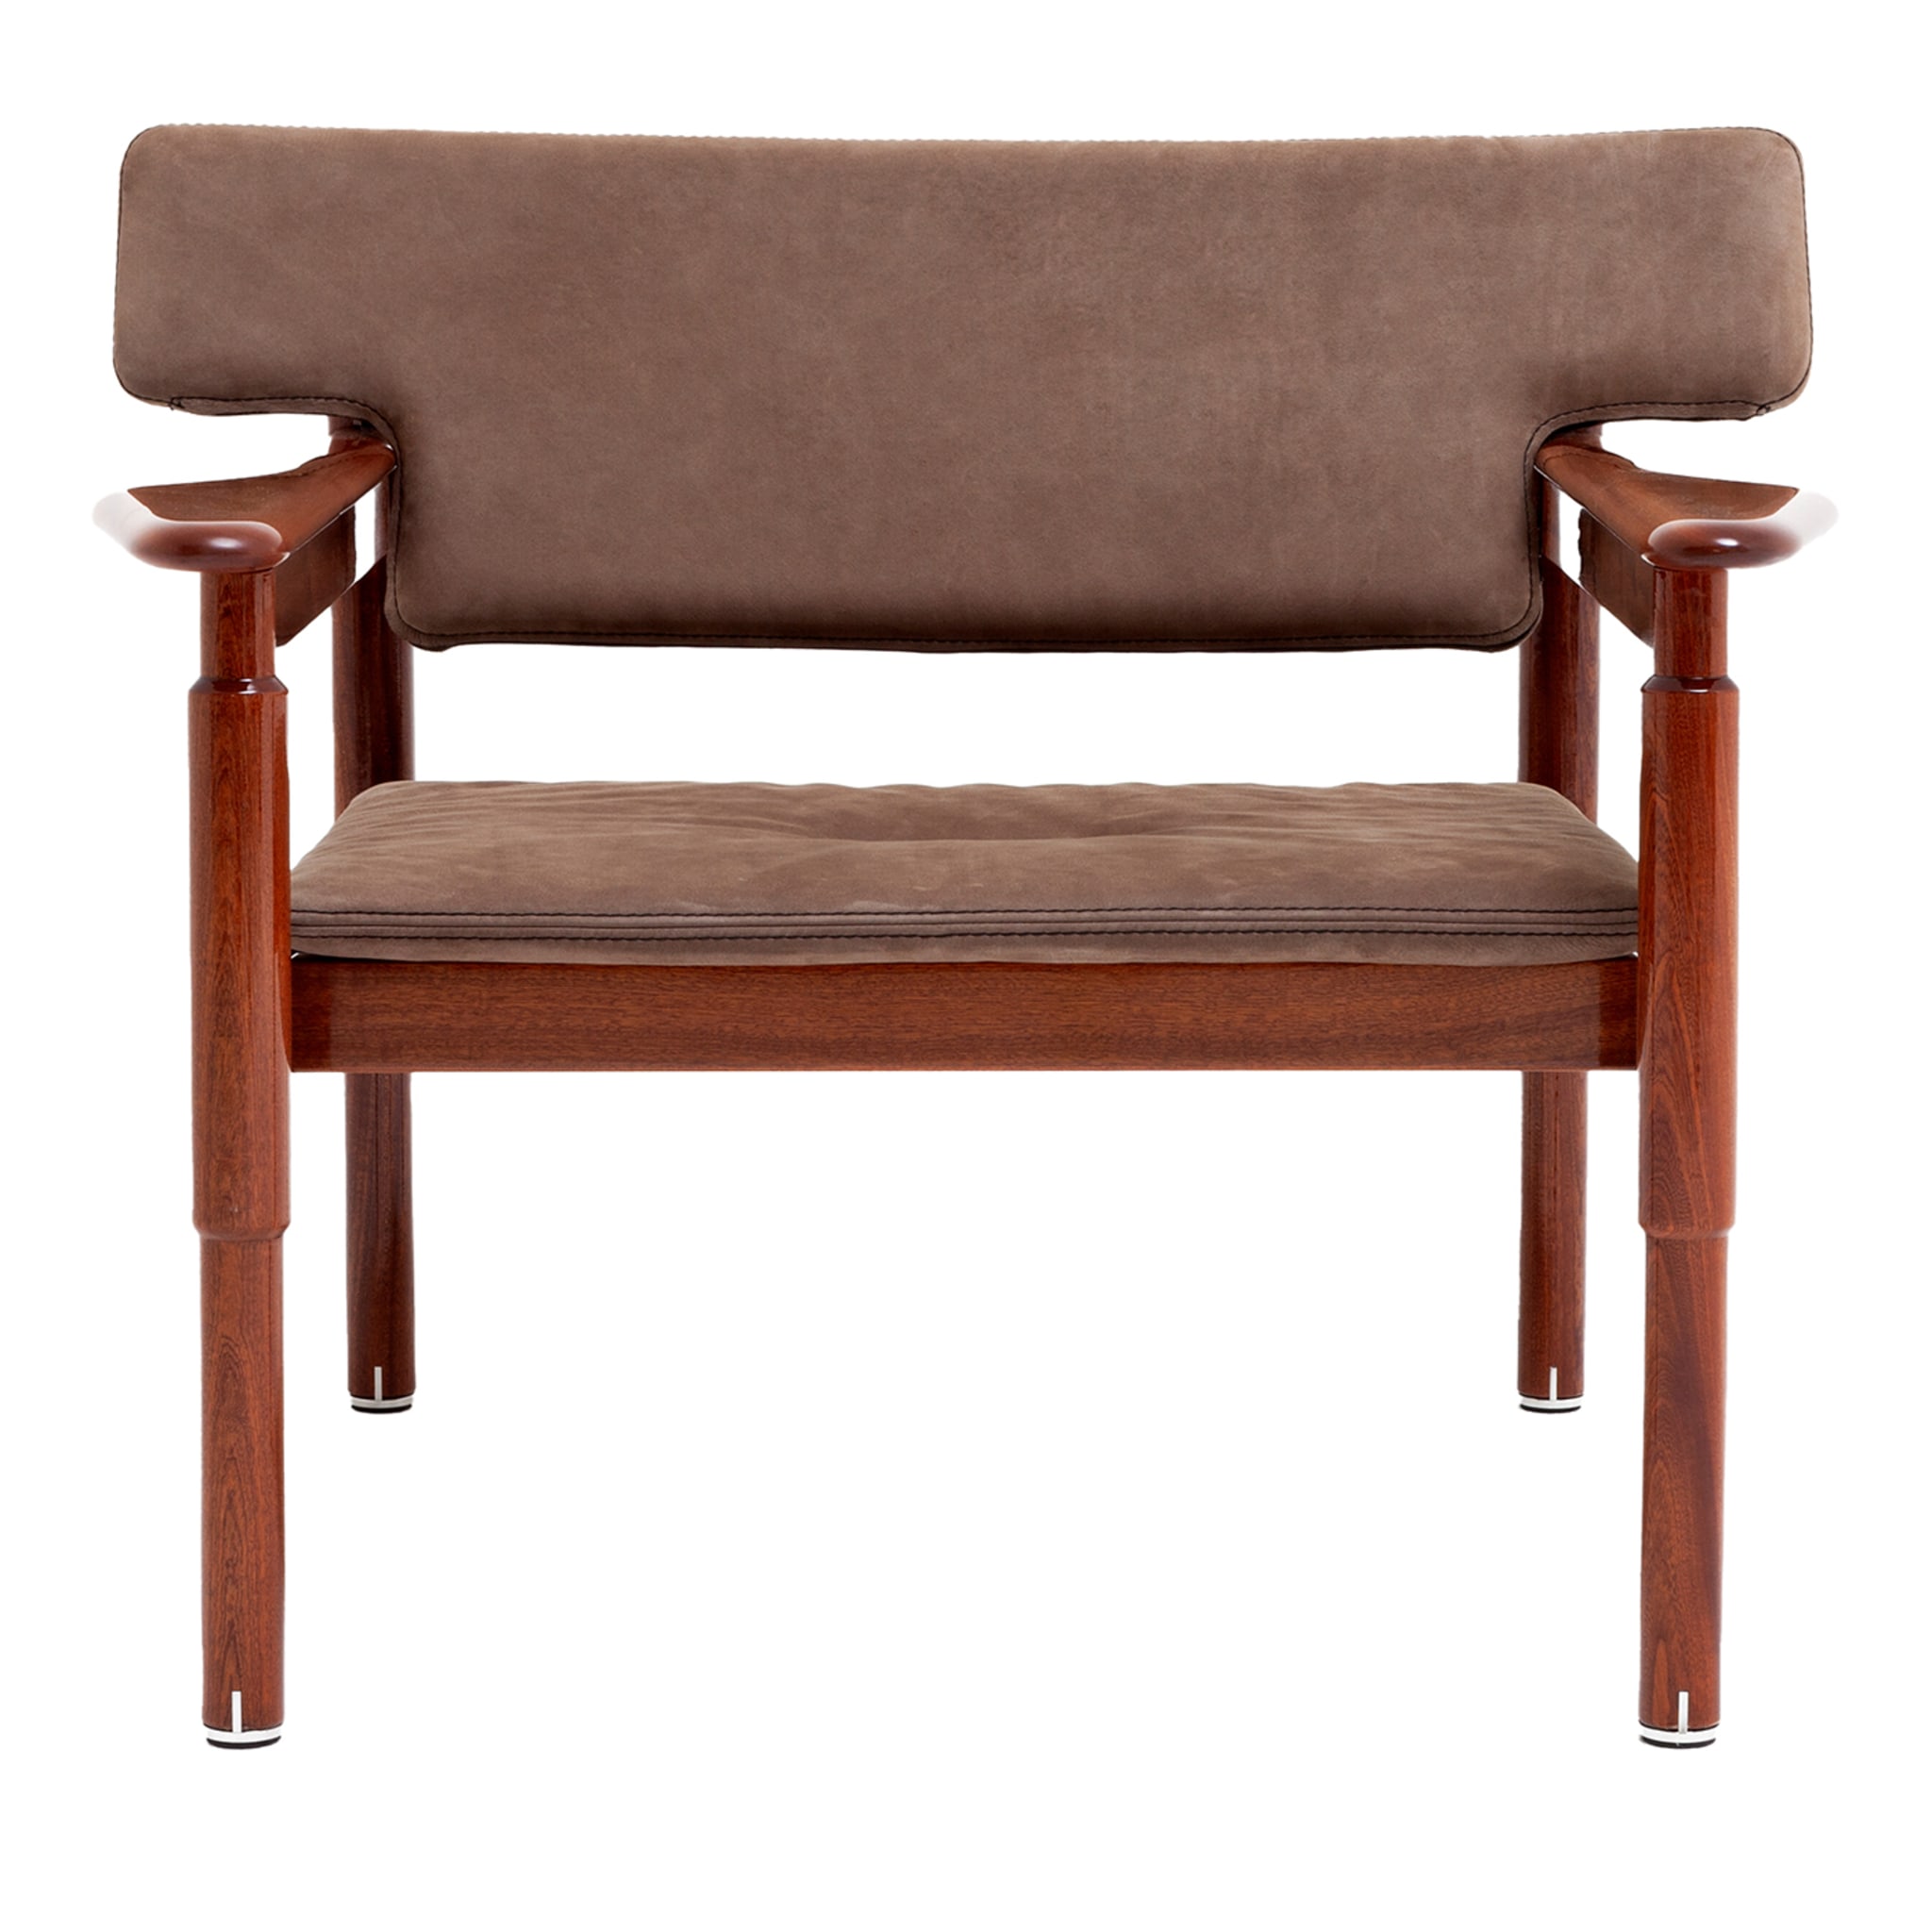 Vieste Large Brown Armchair by Massimo Castagna - Main view